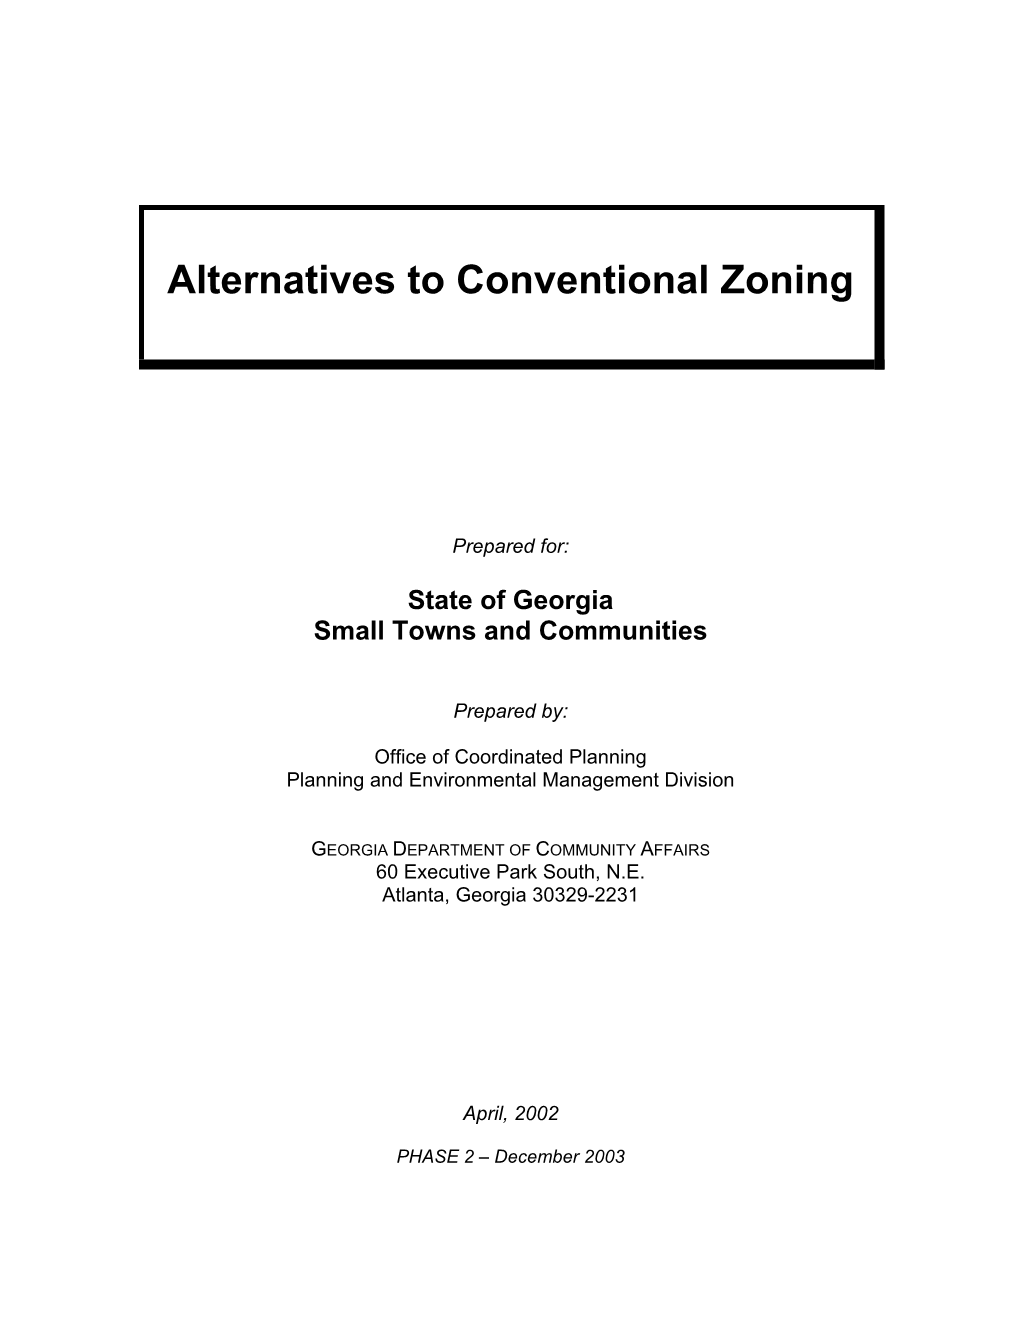 Alternatives to Conventional Zoning